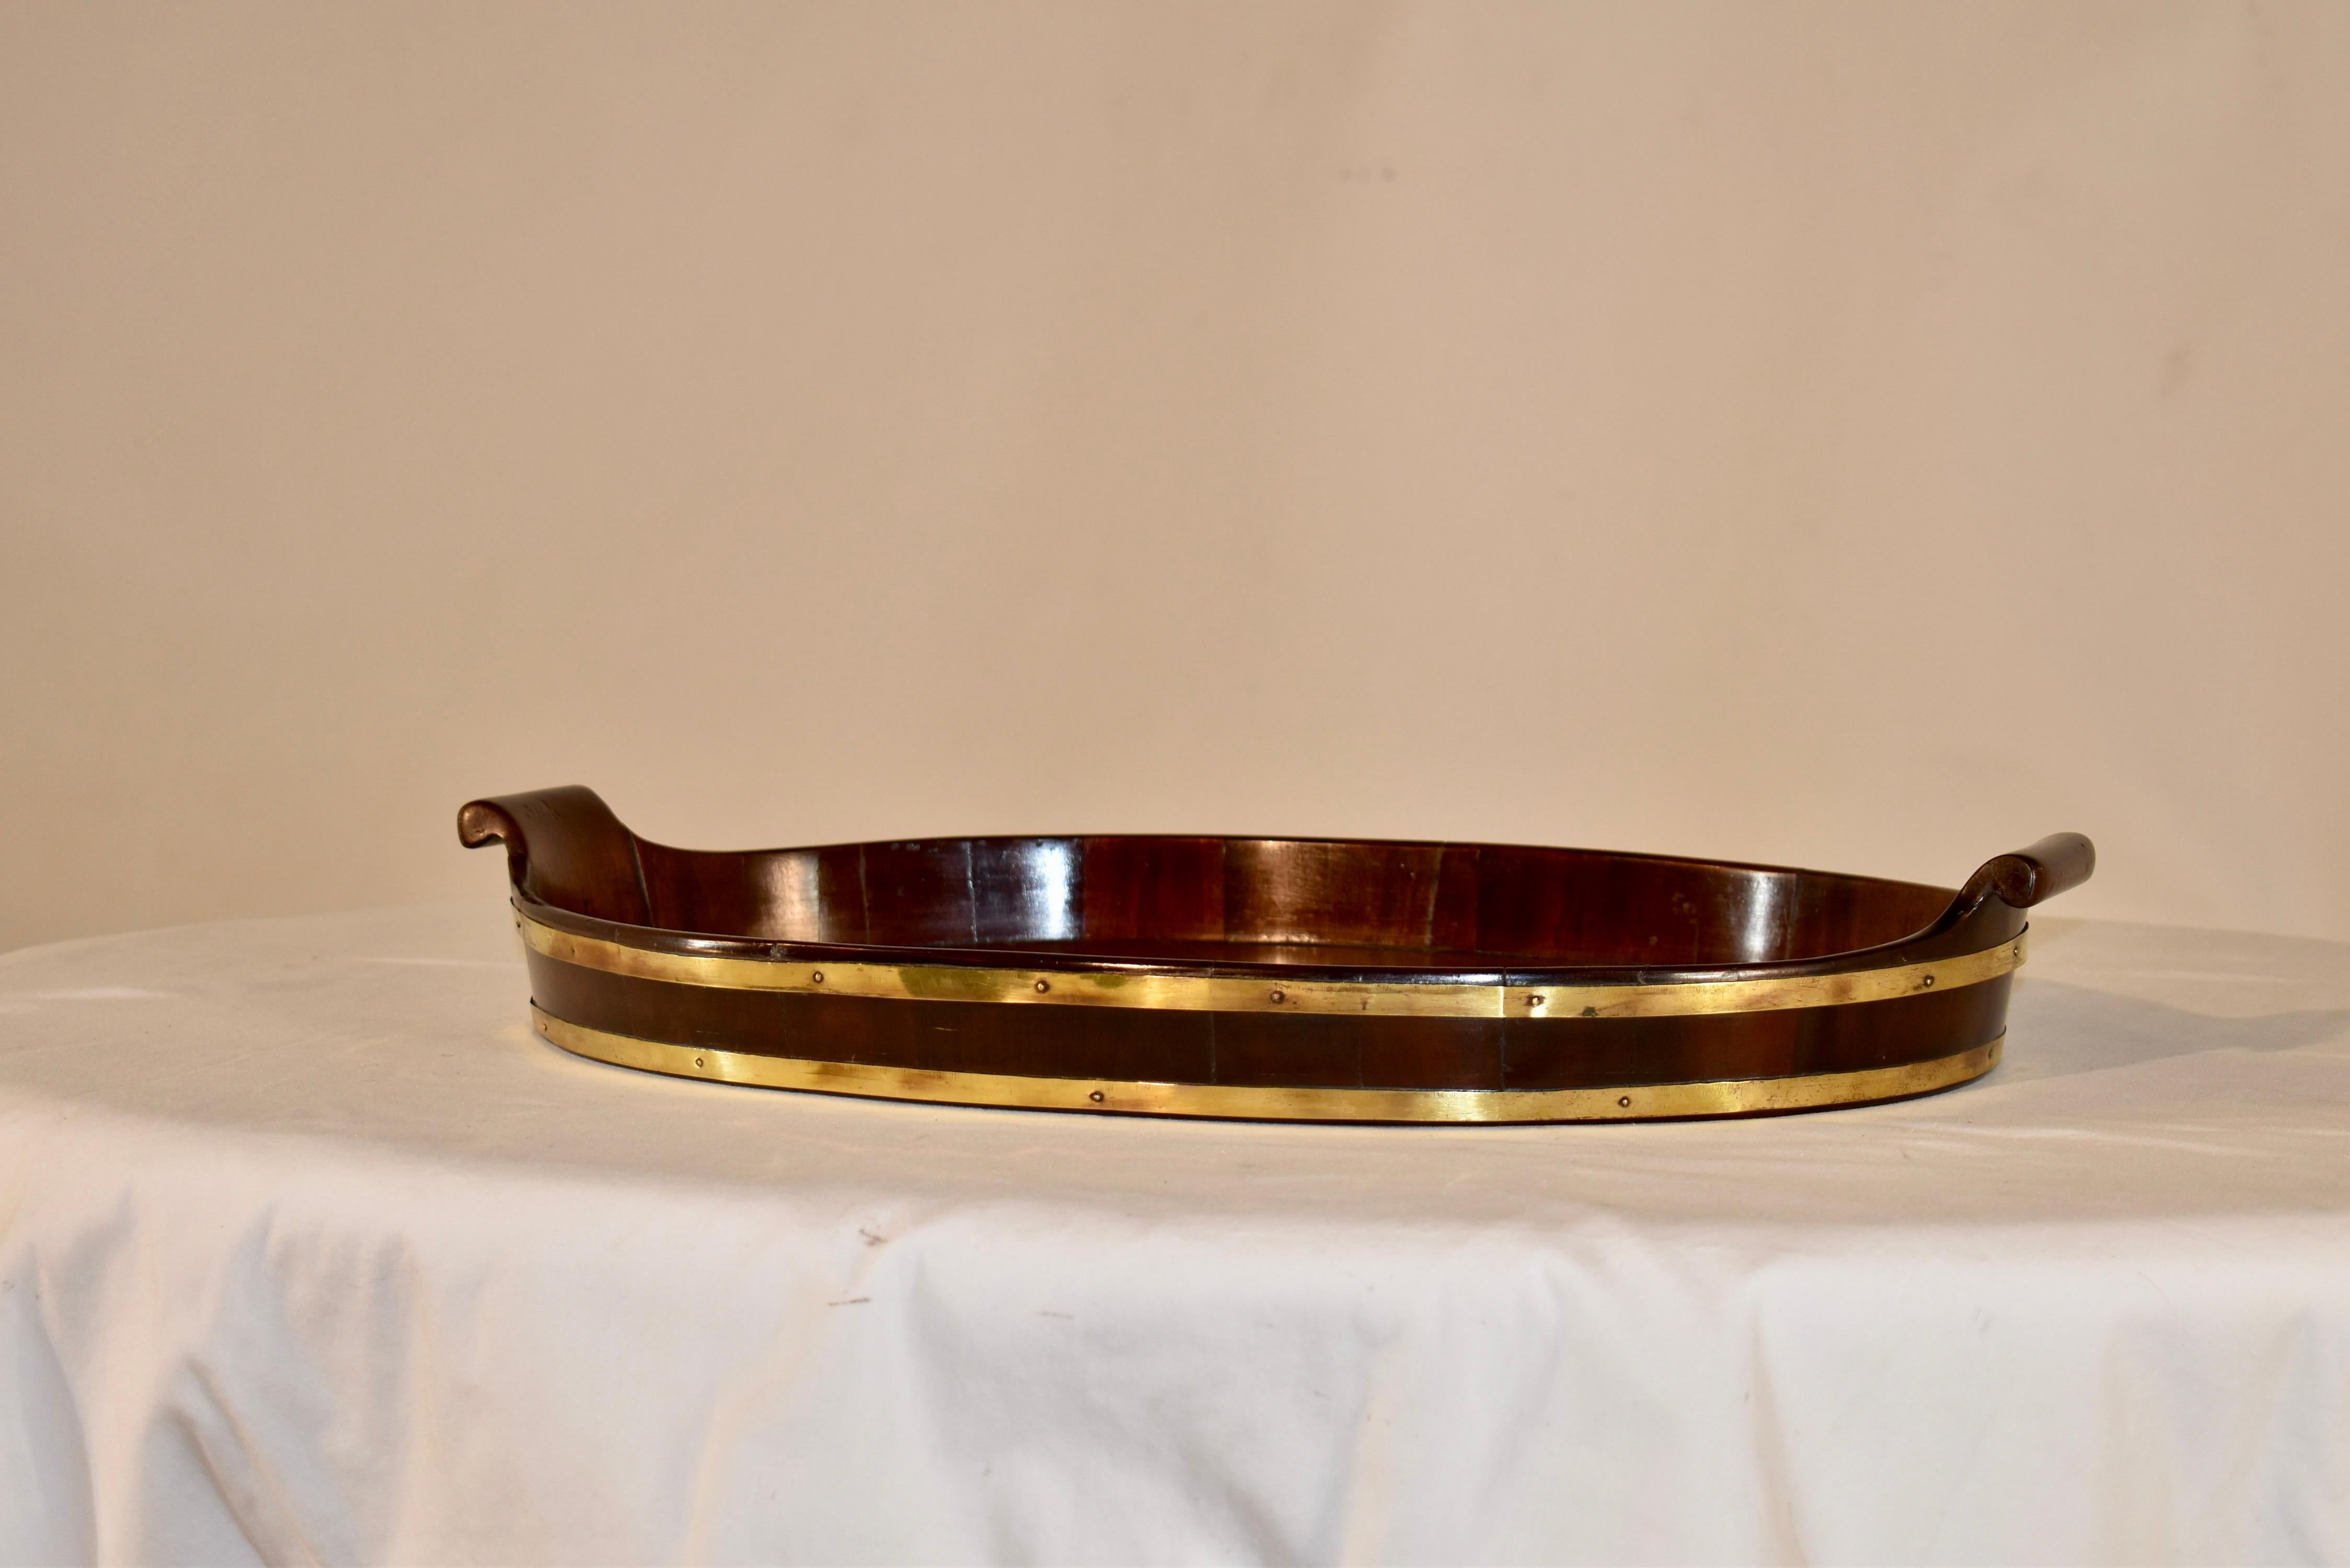 18th Century mahogany tray from England. The tray is made from a single piece of mahogany and the graining is fantastic. The tray is surrounded by a gallery, which is bound by hand made brass strapping. Either end has a hand carved and shaped handle.